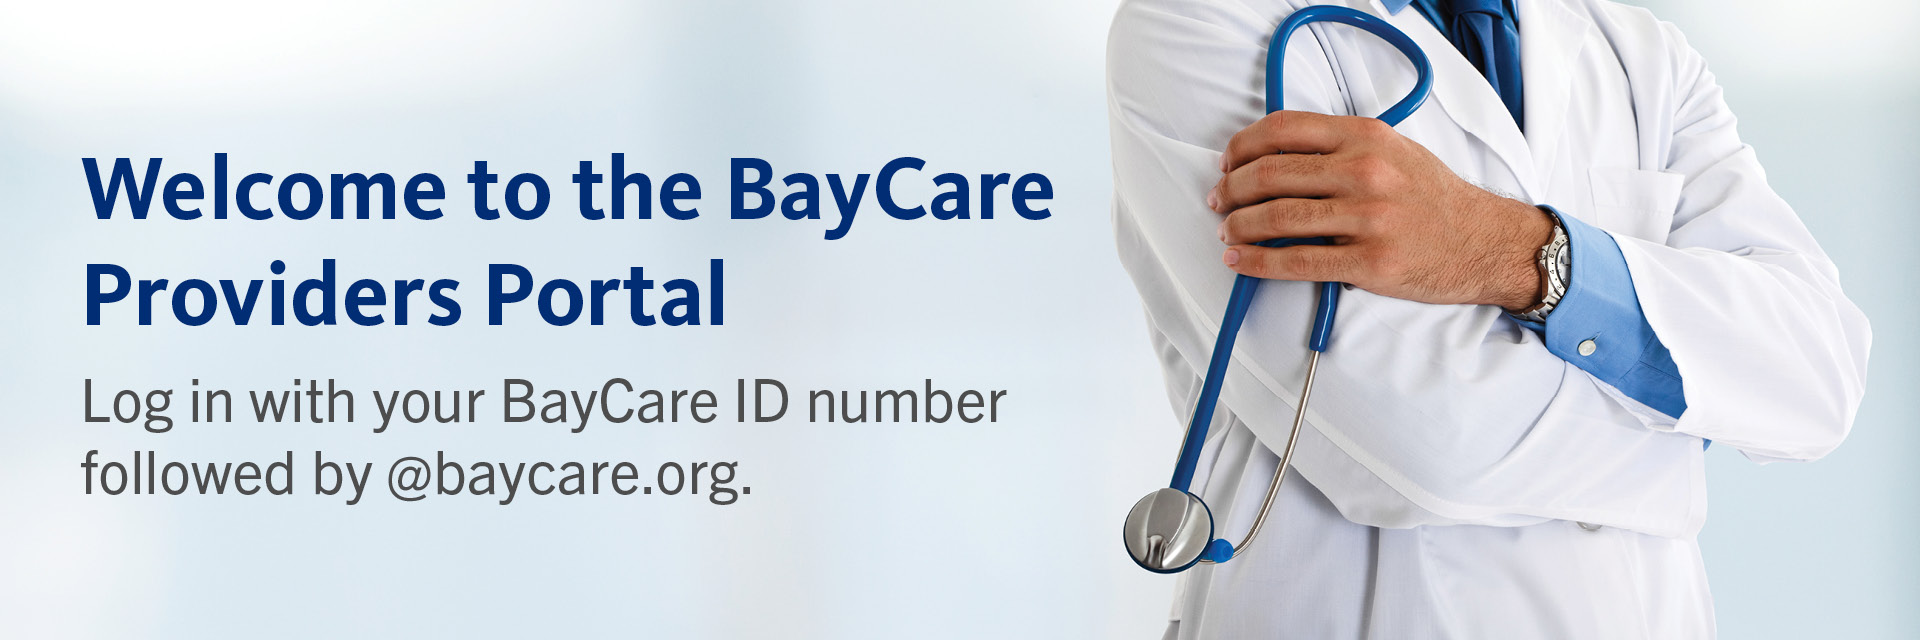 Welcome to the New BayCare Providers Portal